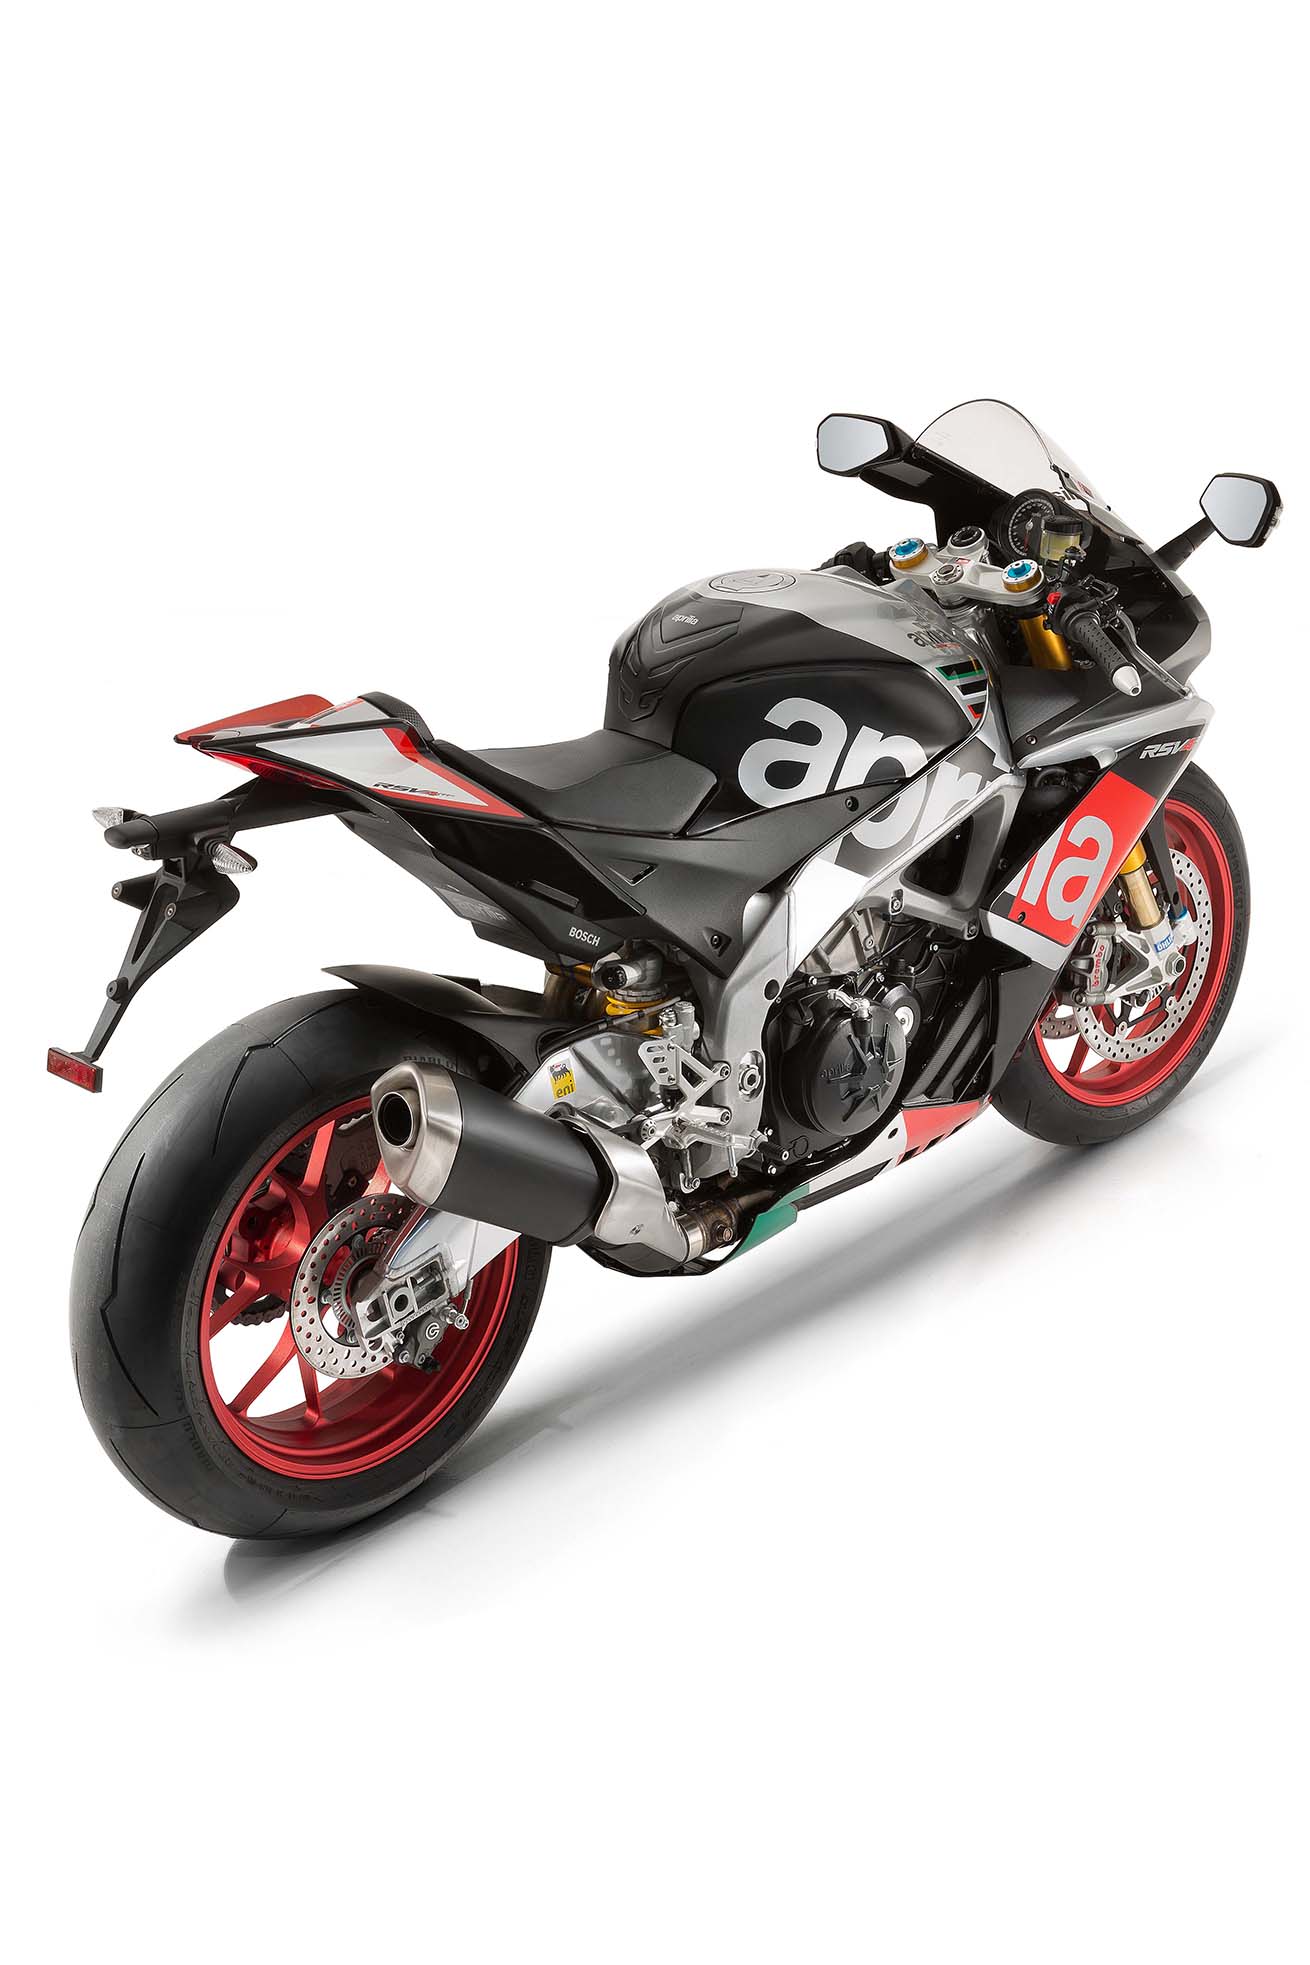 Aprilia updates the RSV4 and introduces a 'Factory Works' version, the RSV4 R-FW